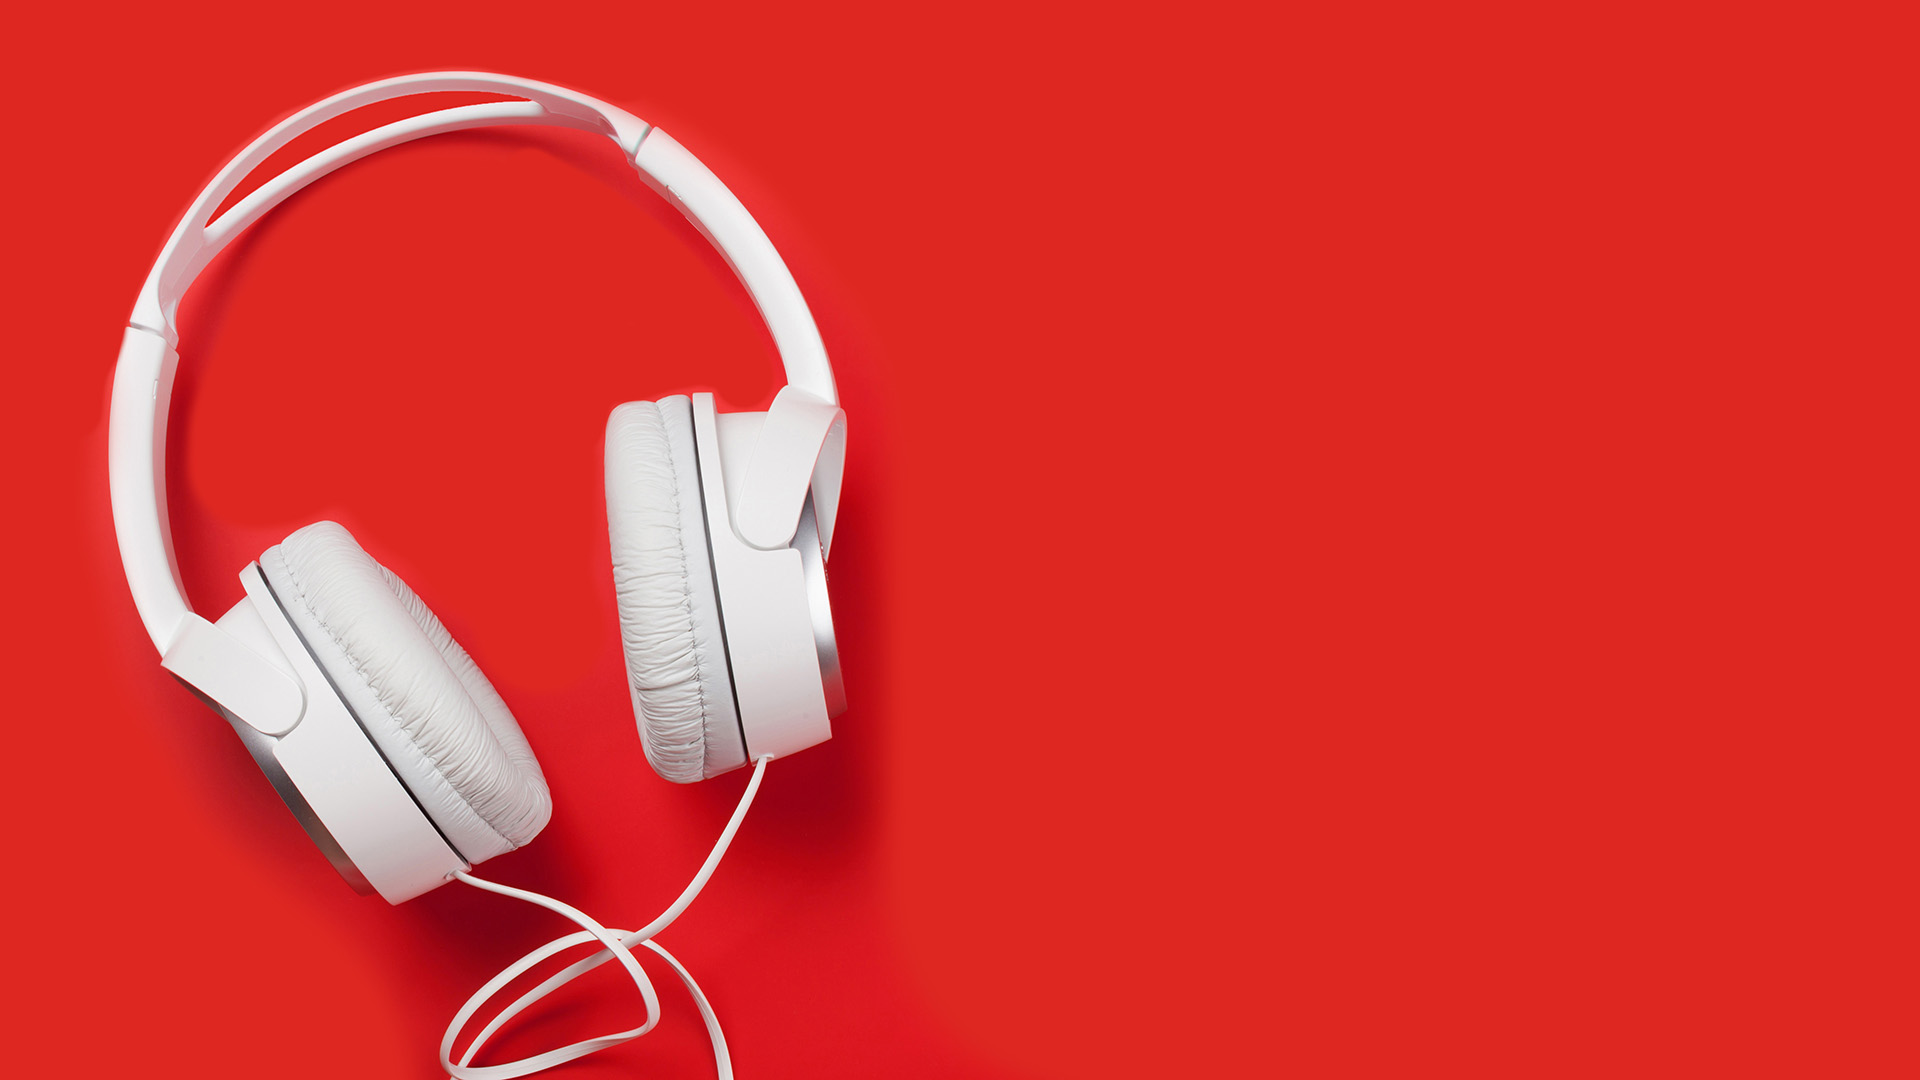 White headphones on top of a red background